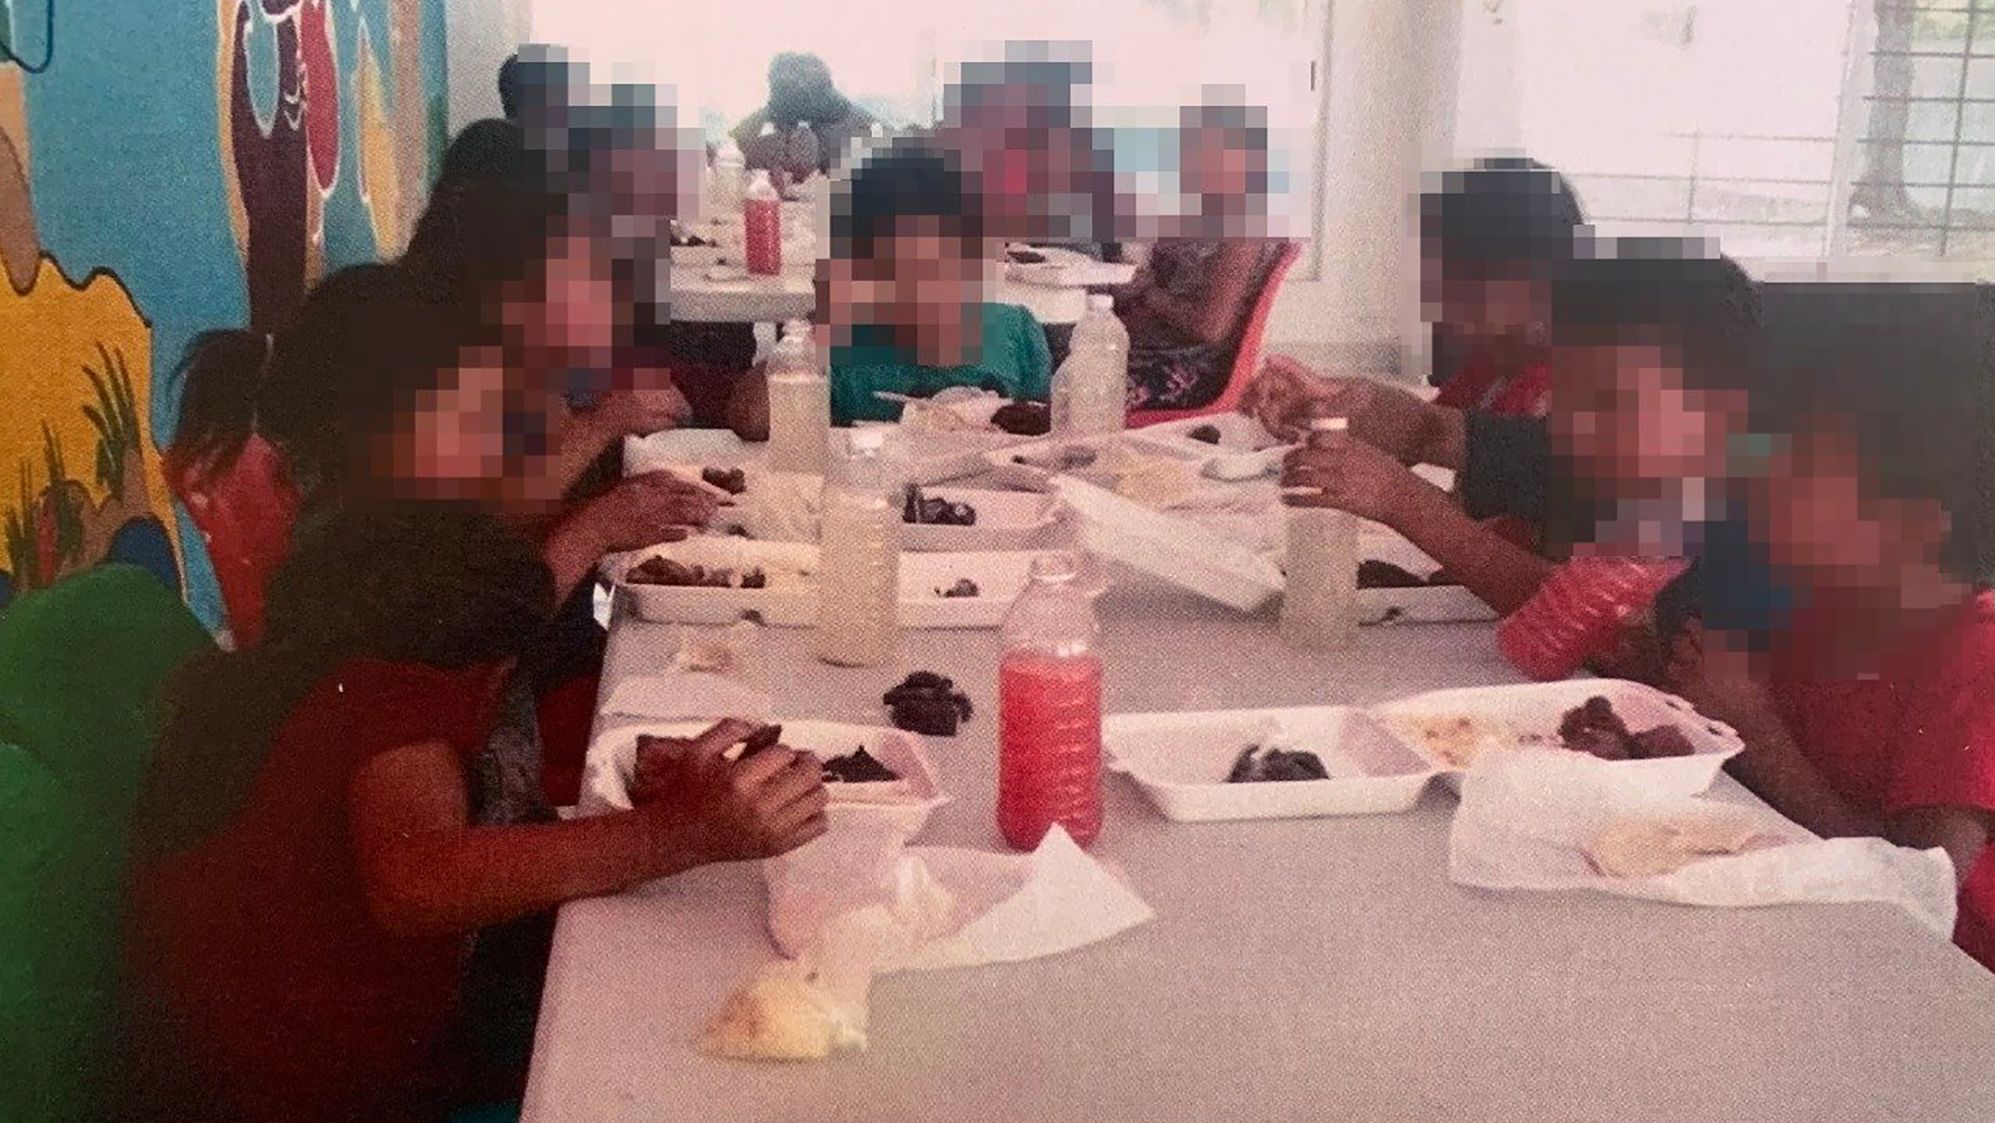 Local government released this photo of the children with their faces blurred.